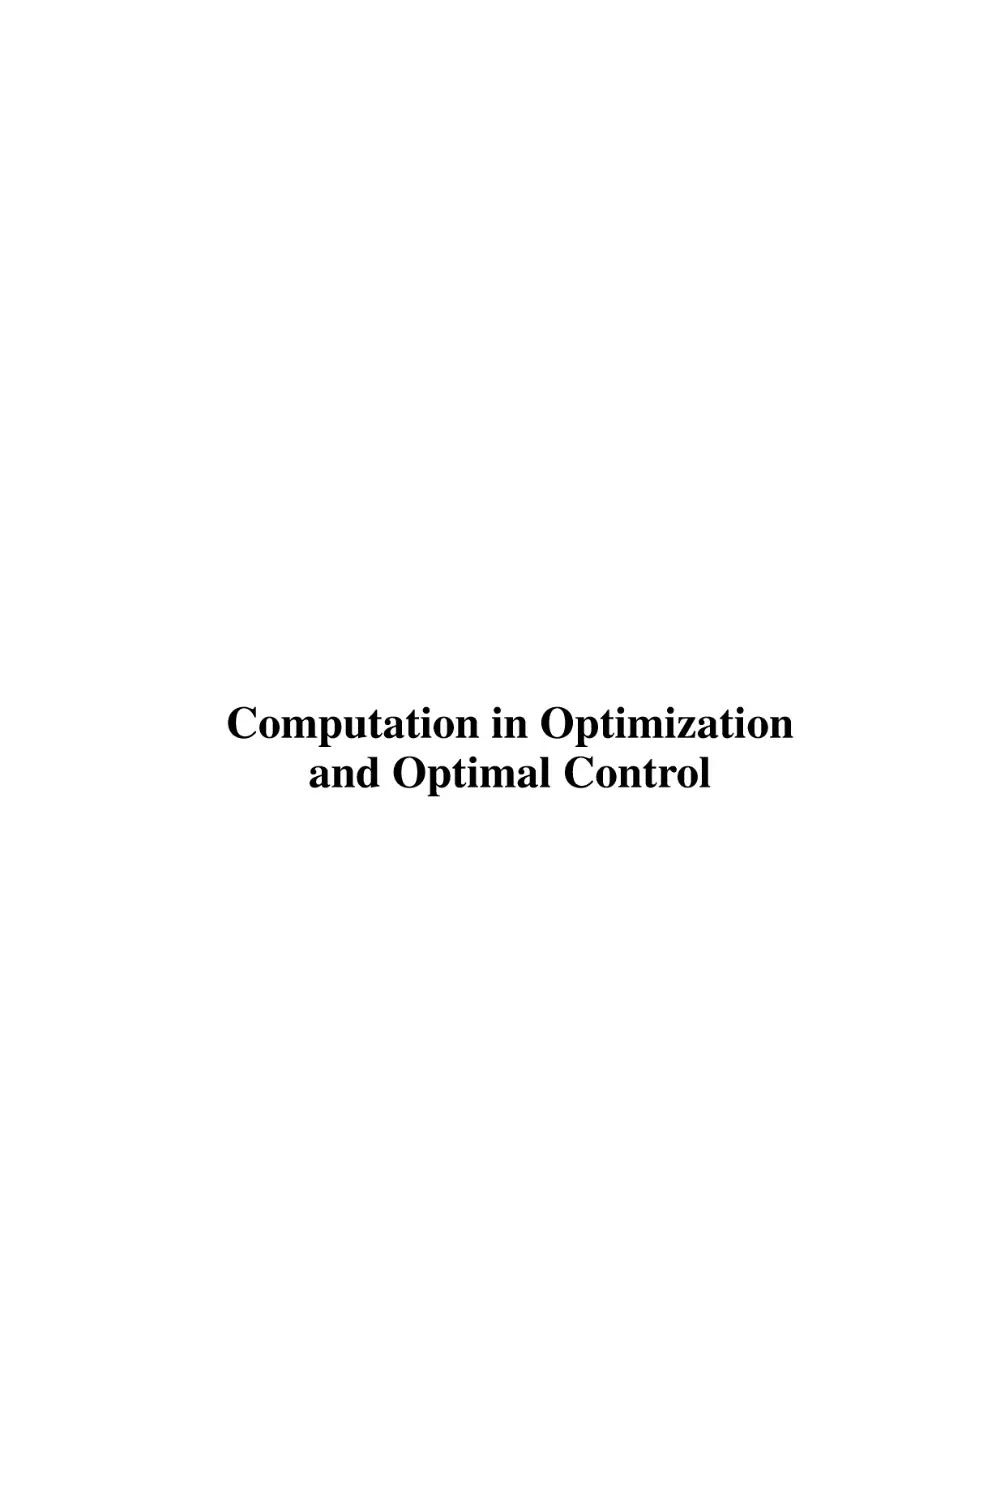 Computation in Optimization and Optimal Control